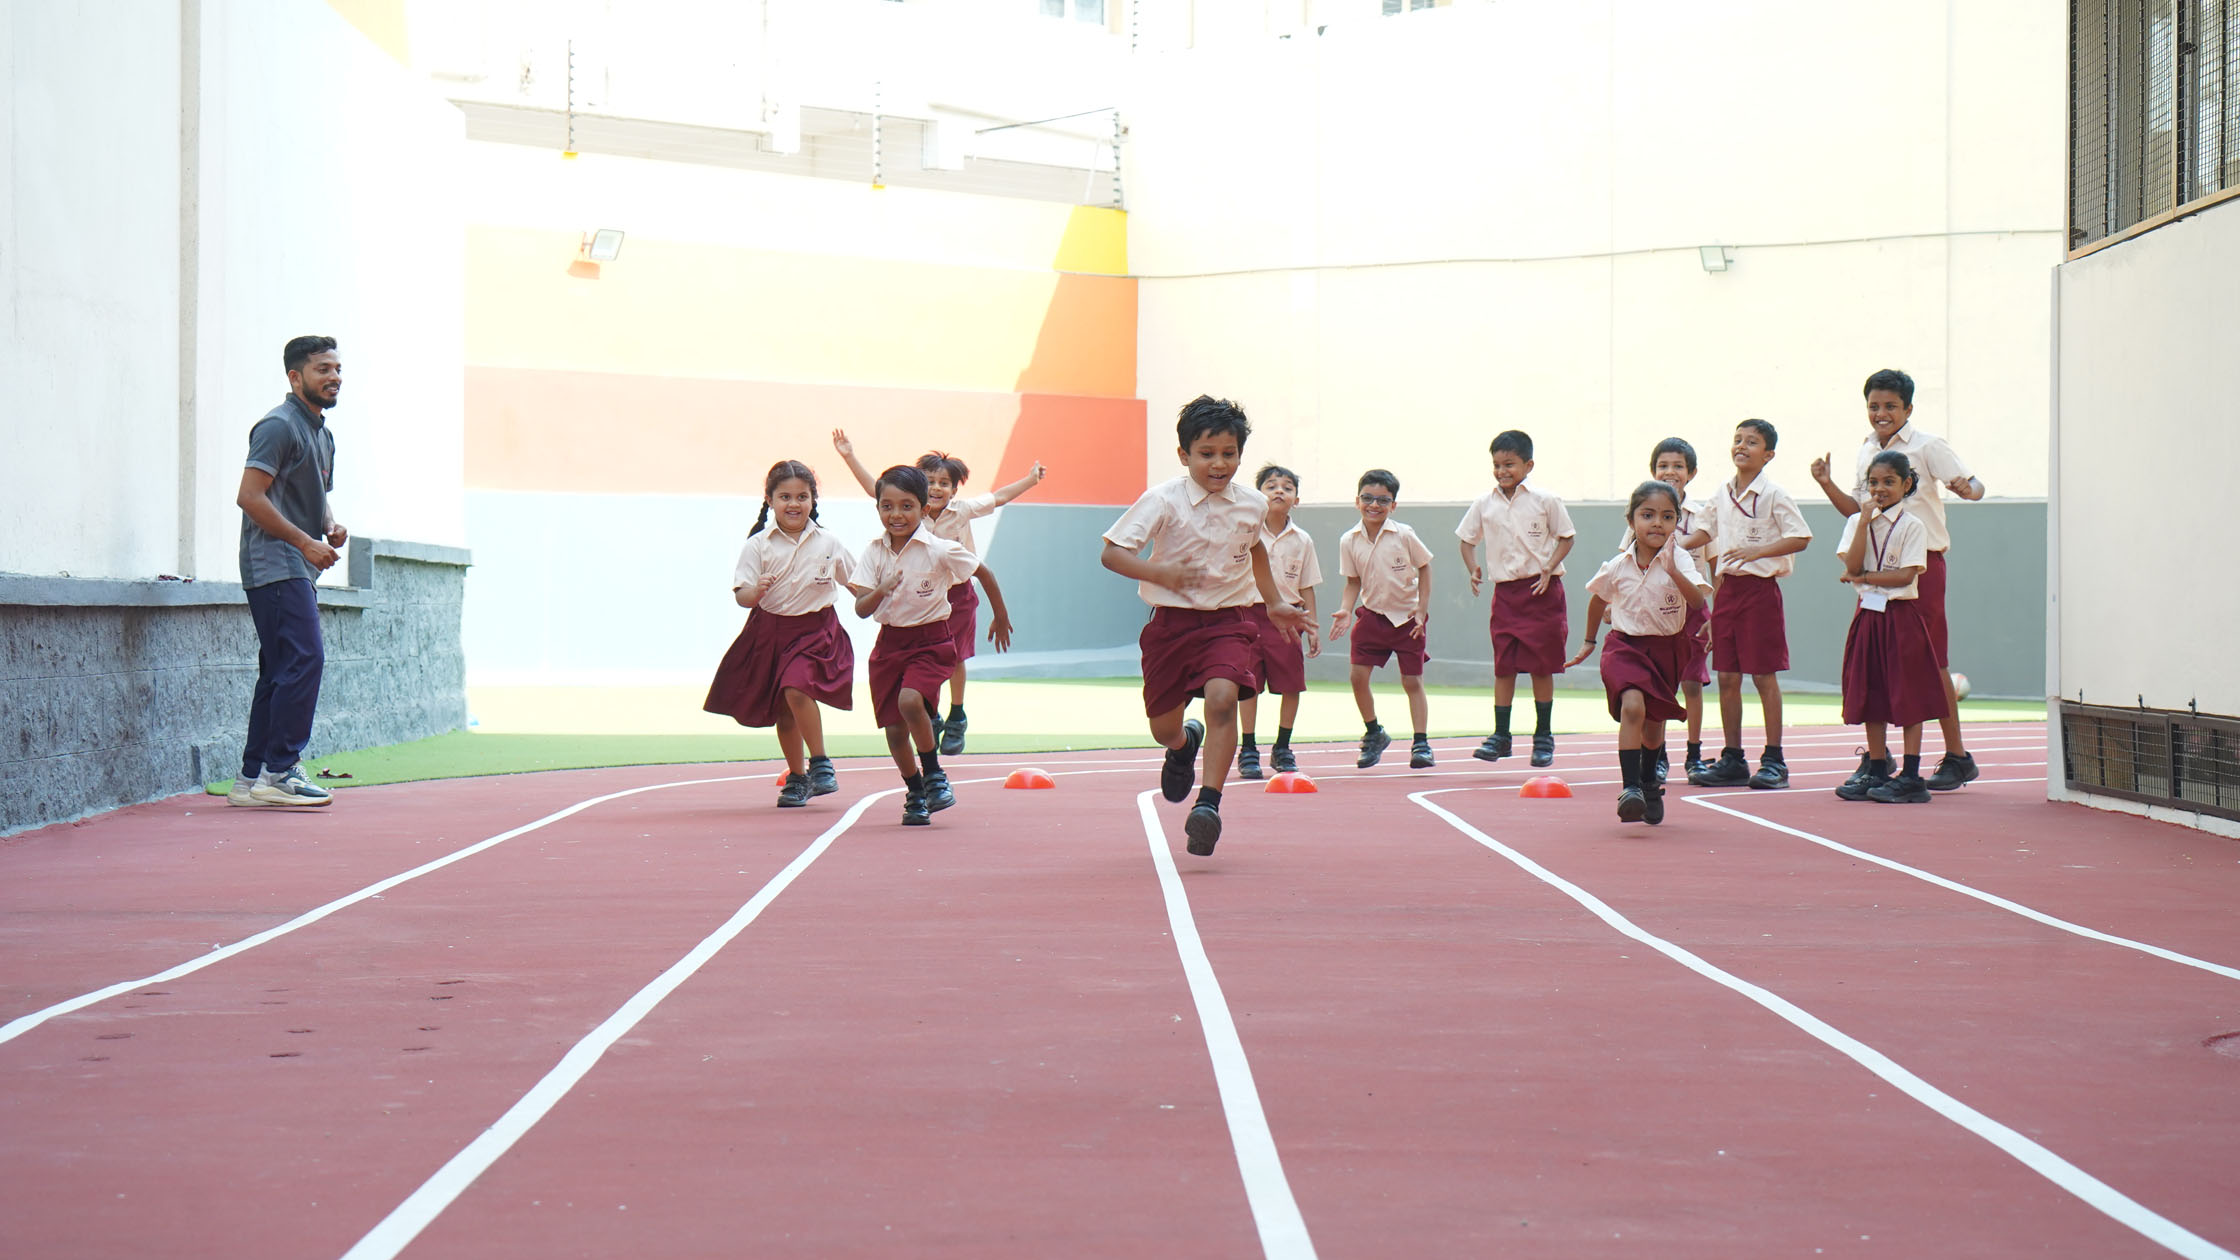 Snaps during the athletics competition at Walkertown Academy - Top schools in hyderabad